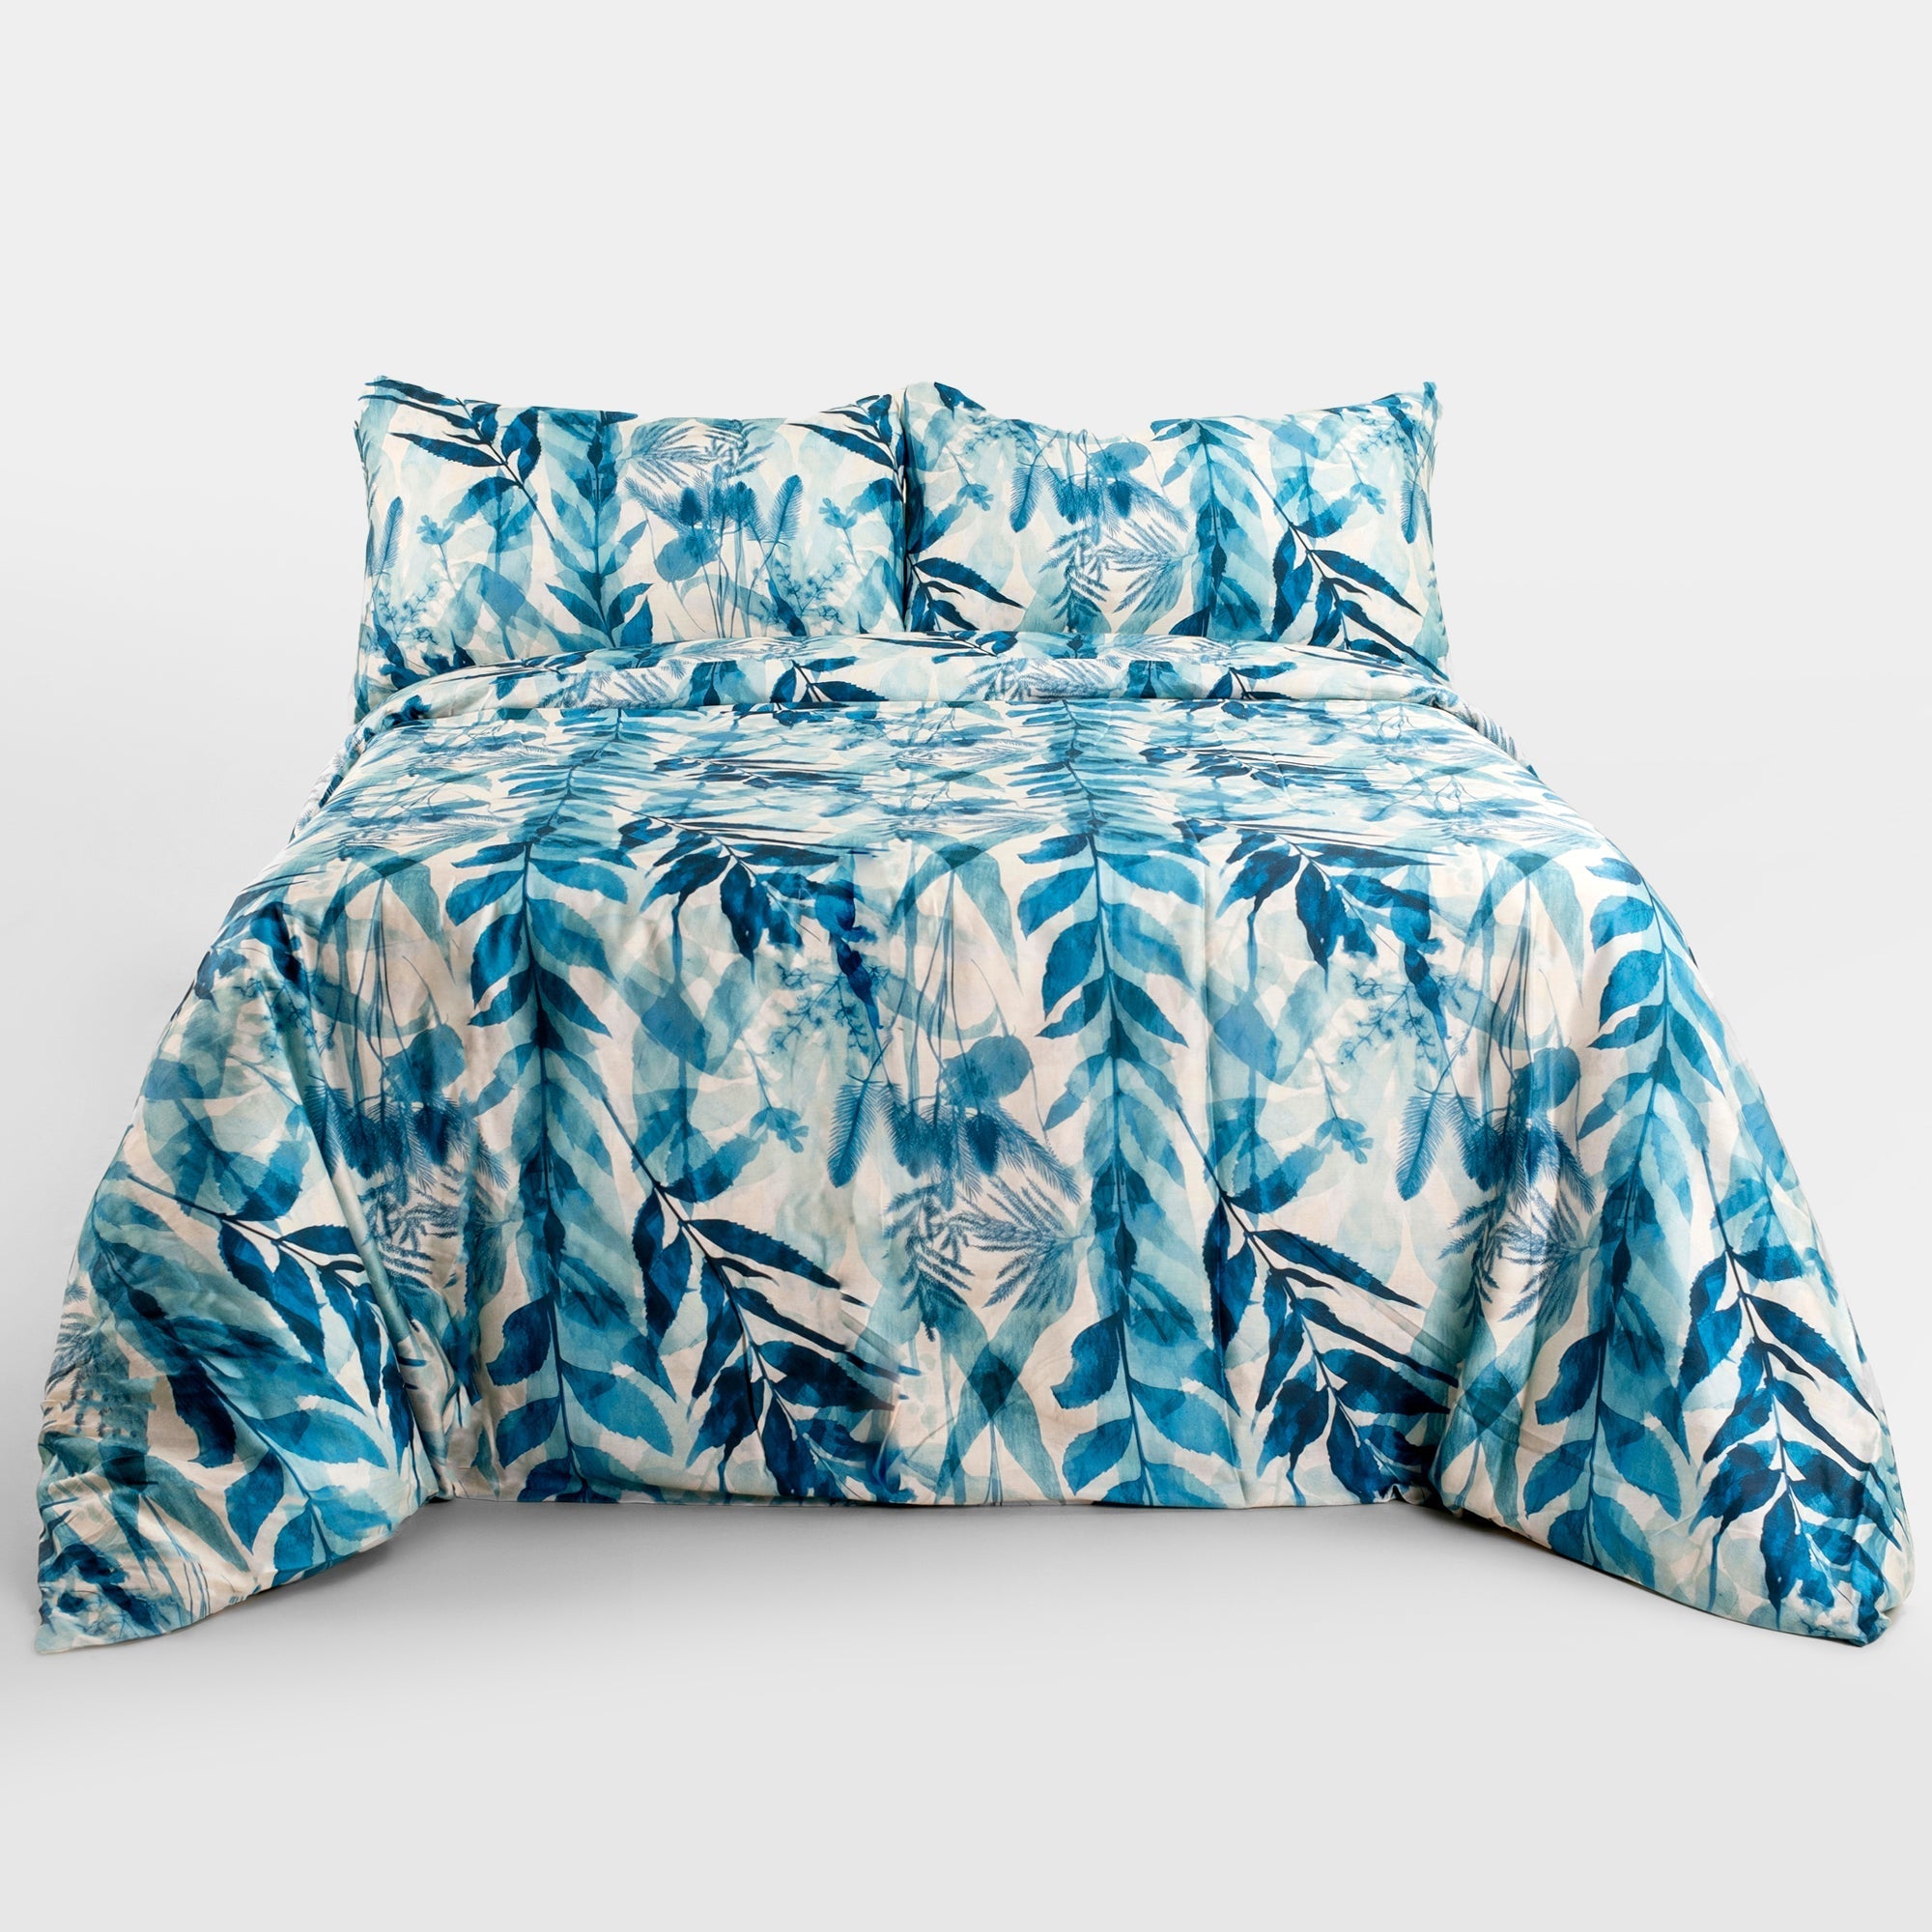 The Linen Company Bedding Queen Icefall Duvet Cover Set